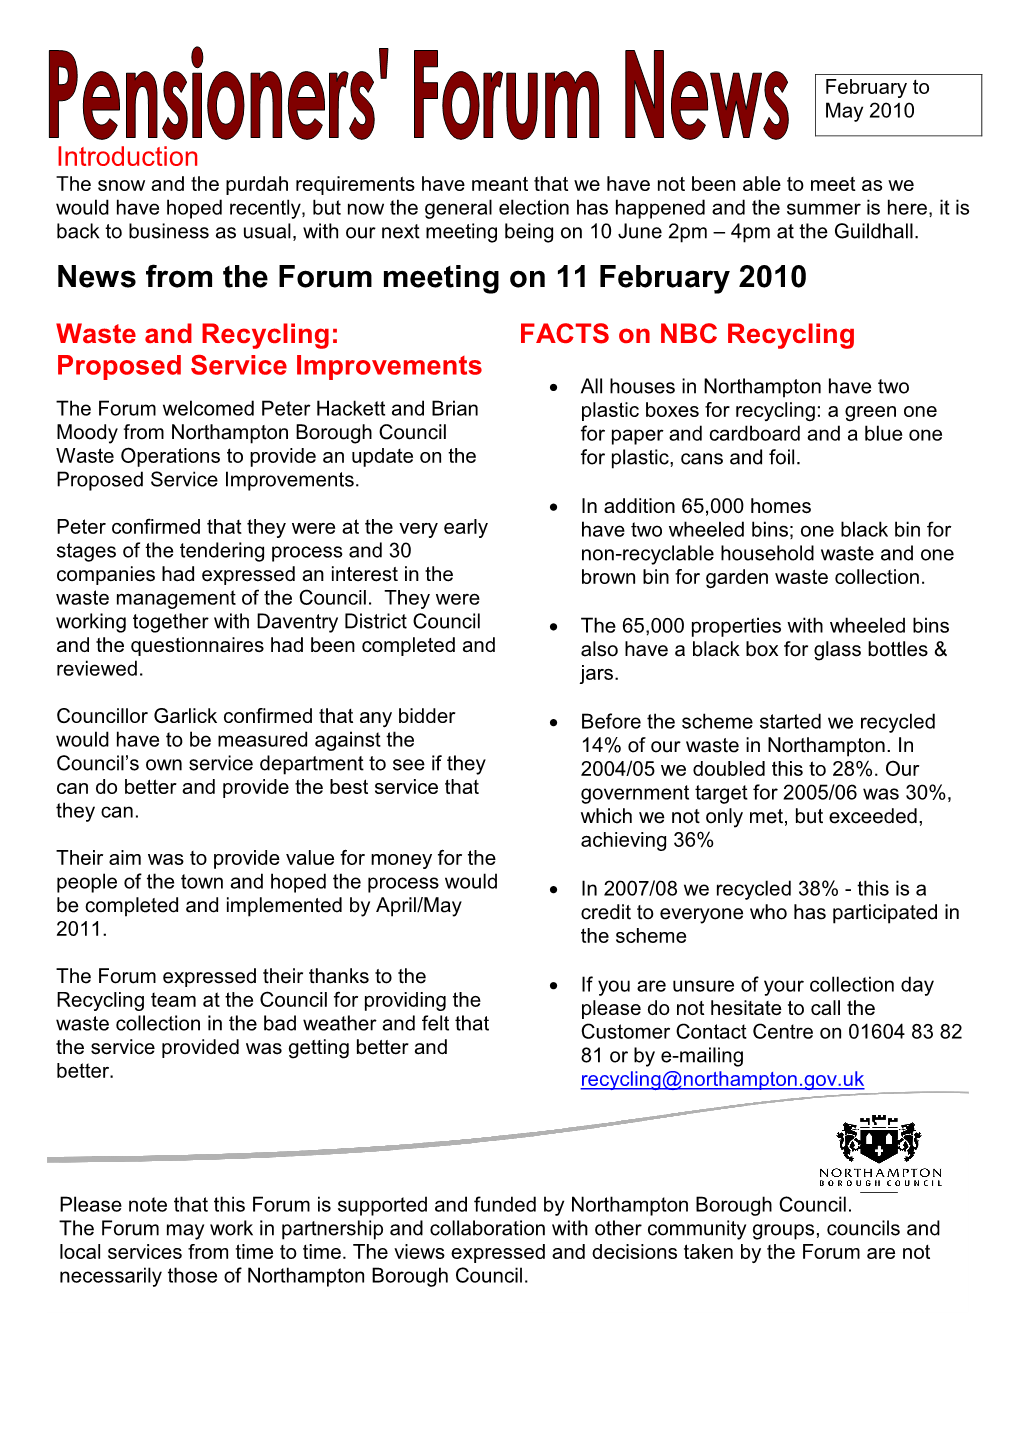 News from the Forum Meeting on 11 February 2010